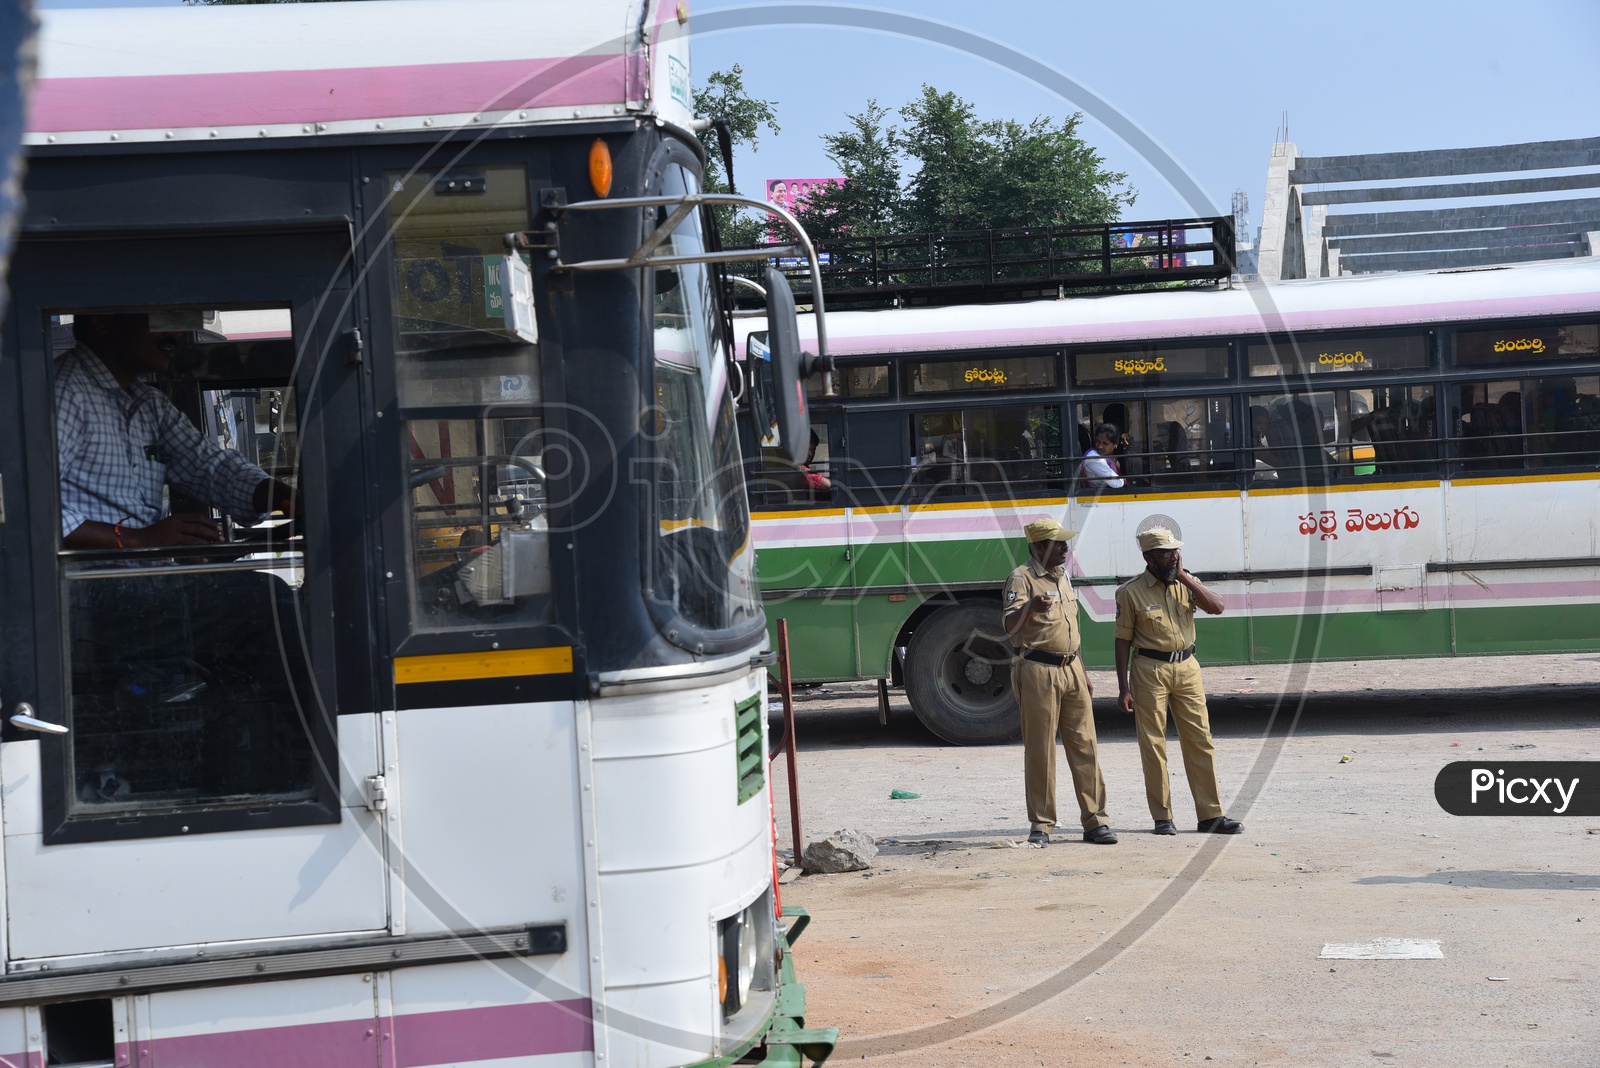 Police protection for the buses being run with Private temporary drivers and conductors at many bus stands and roads across telangana because of the ongoing indefinite strike of TSRTC workers, October 7, 2019